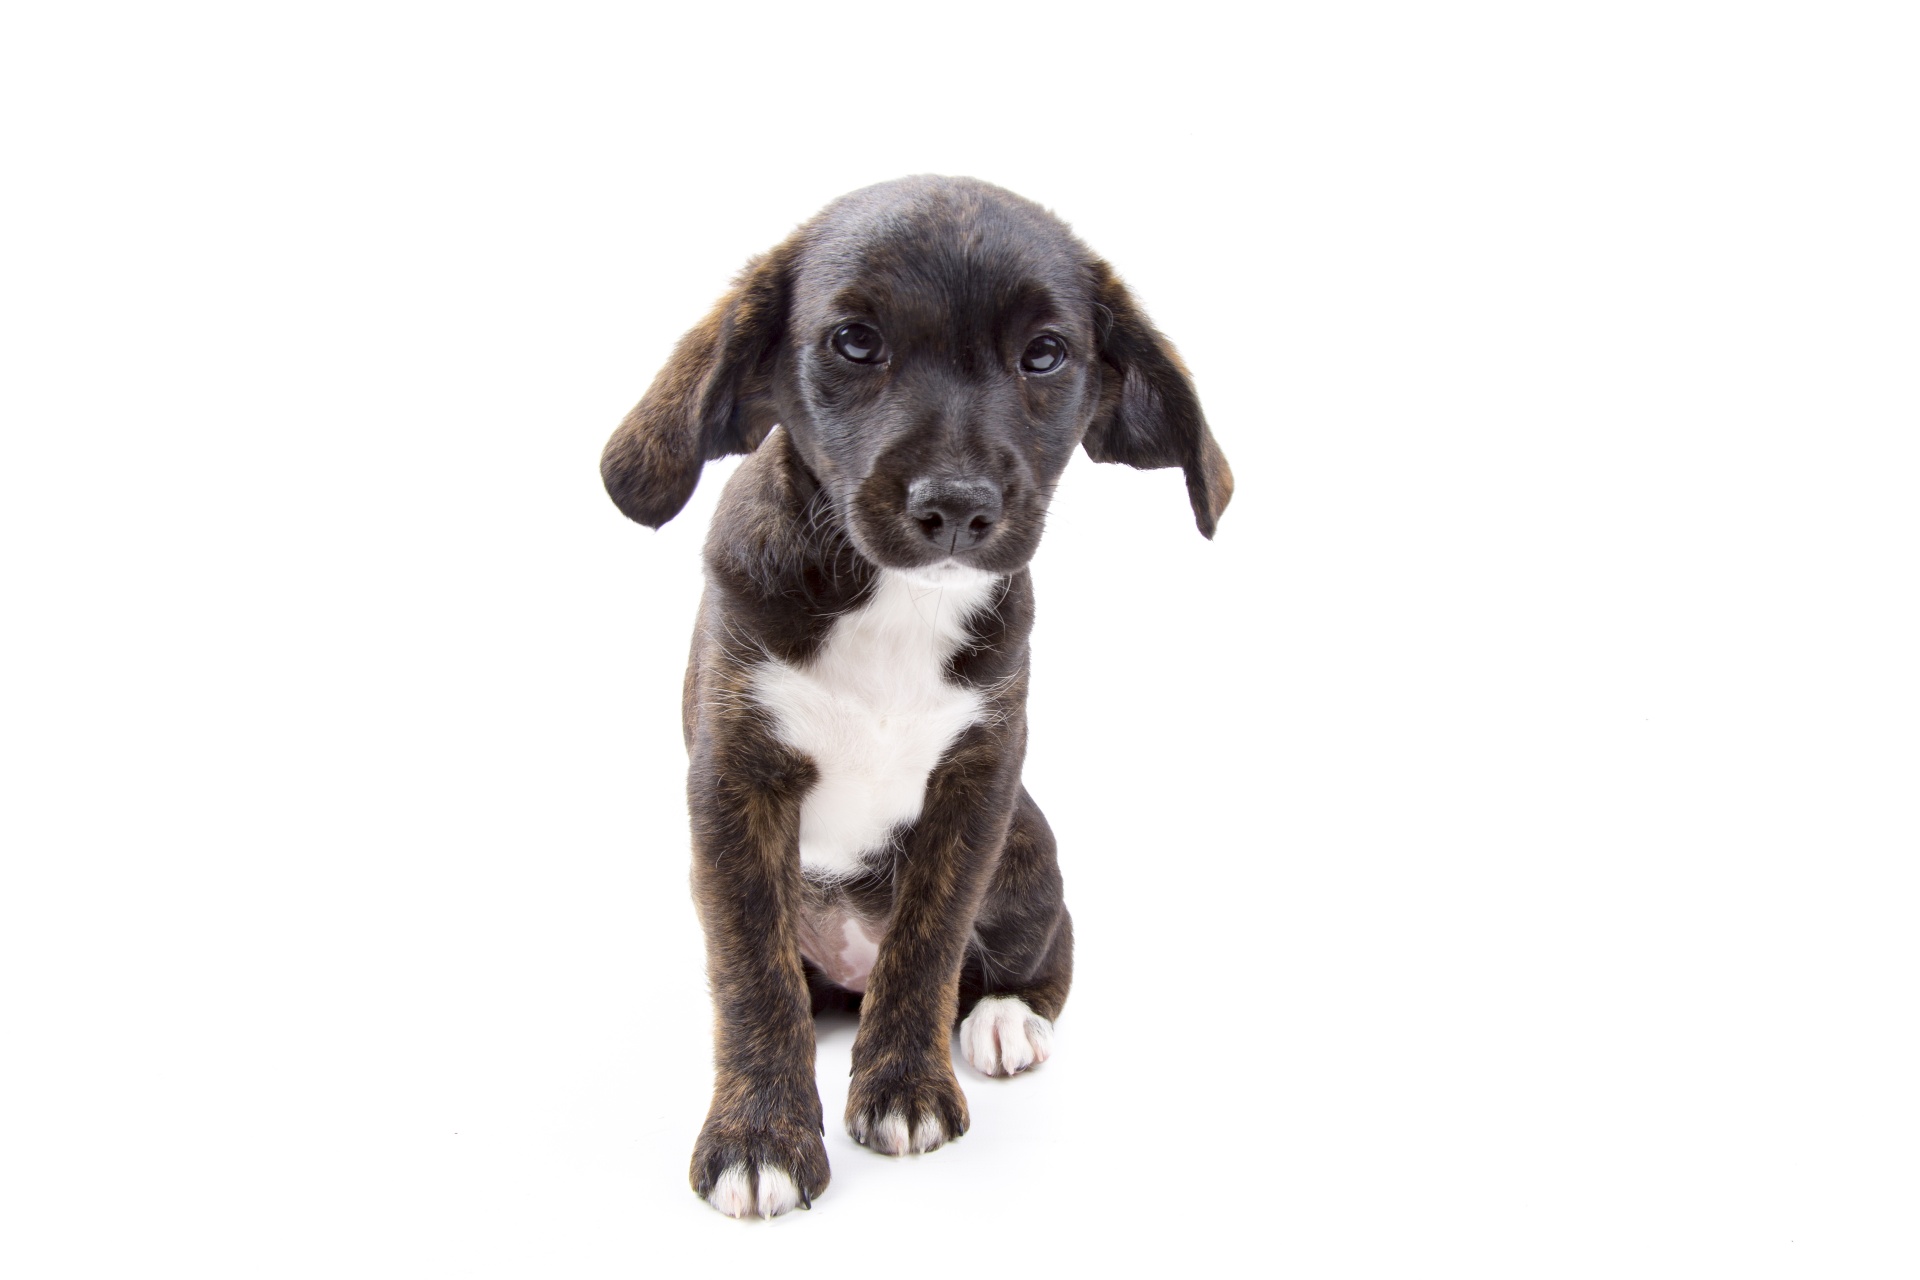 Beautiful Puppy Dog, Lapaso Poodle And Jack Russell Breed, Isolated On The White Background